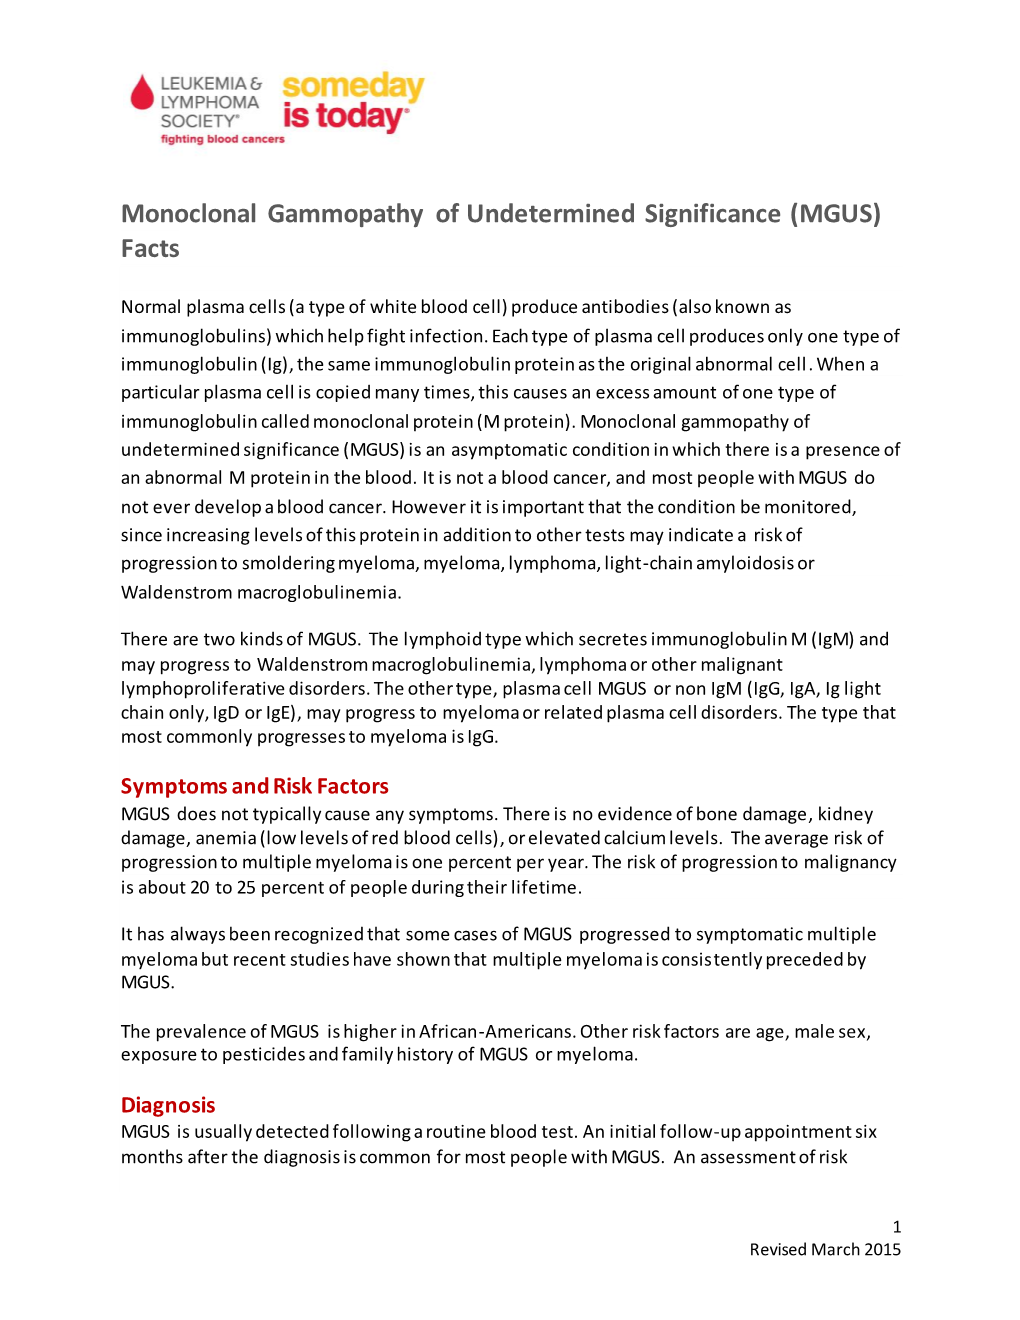 Monoclonal Gammopathy of Undetermined Significance (MGUS) Facts